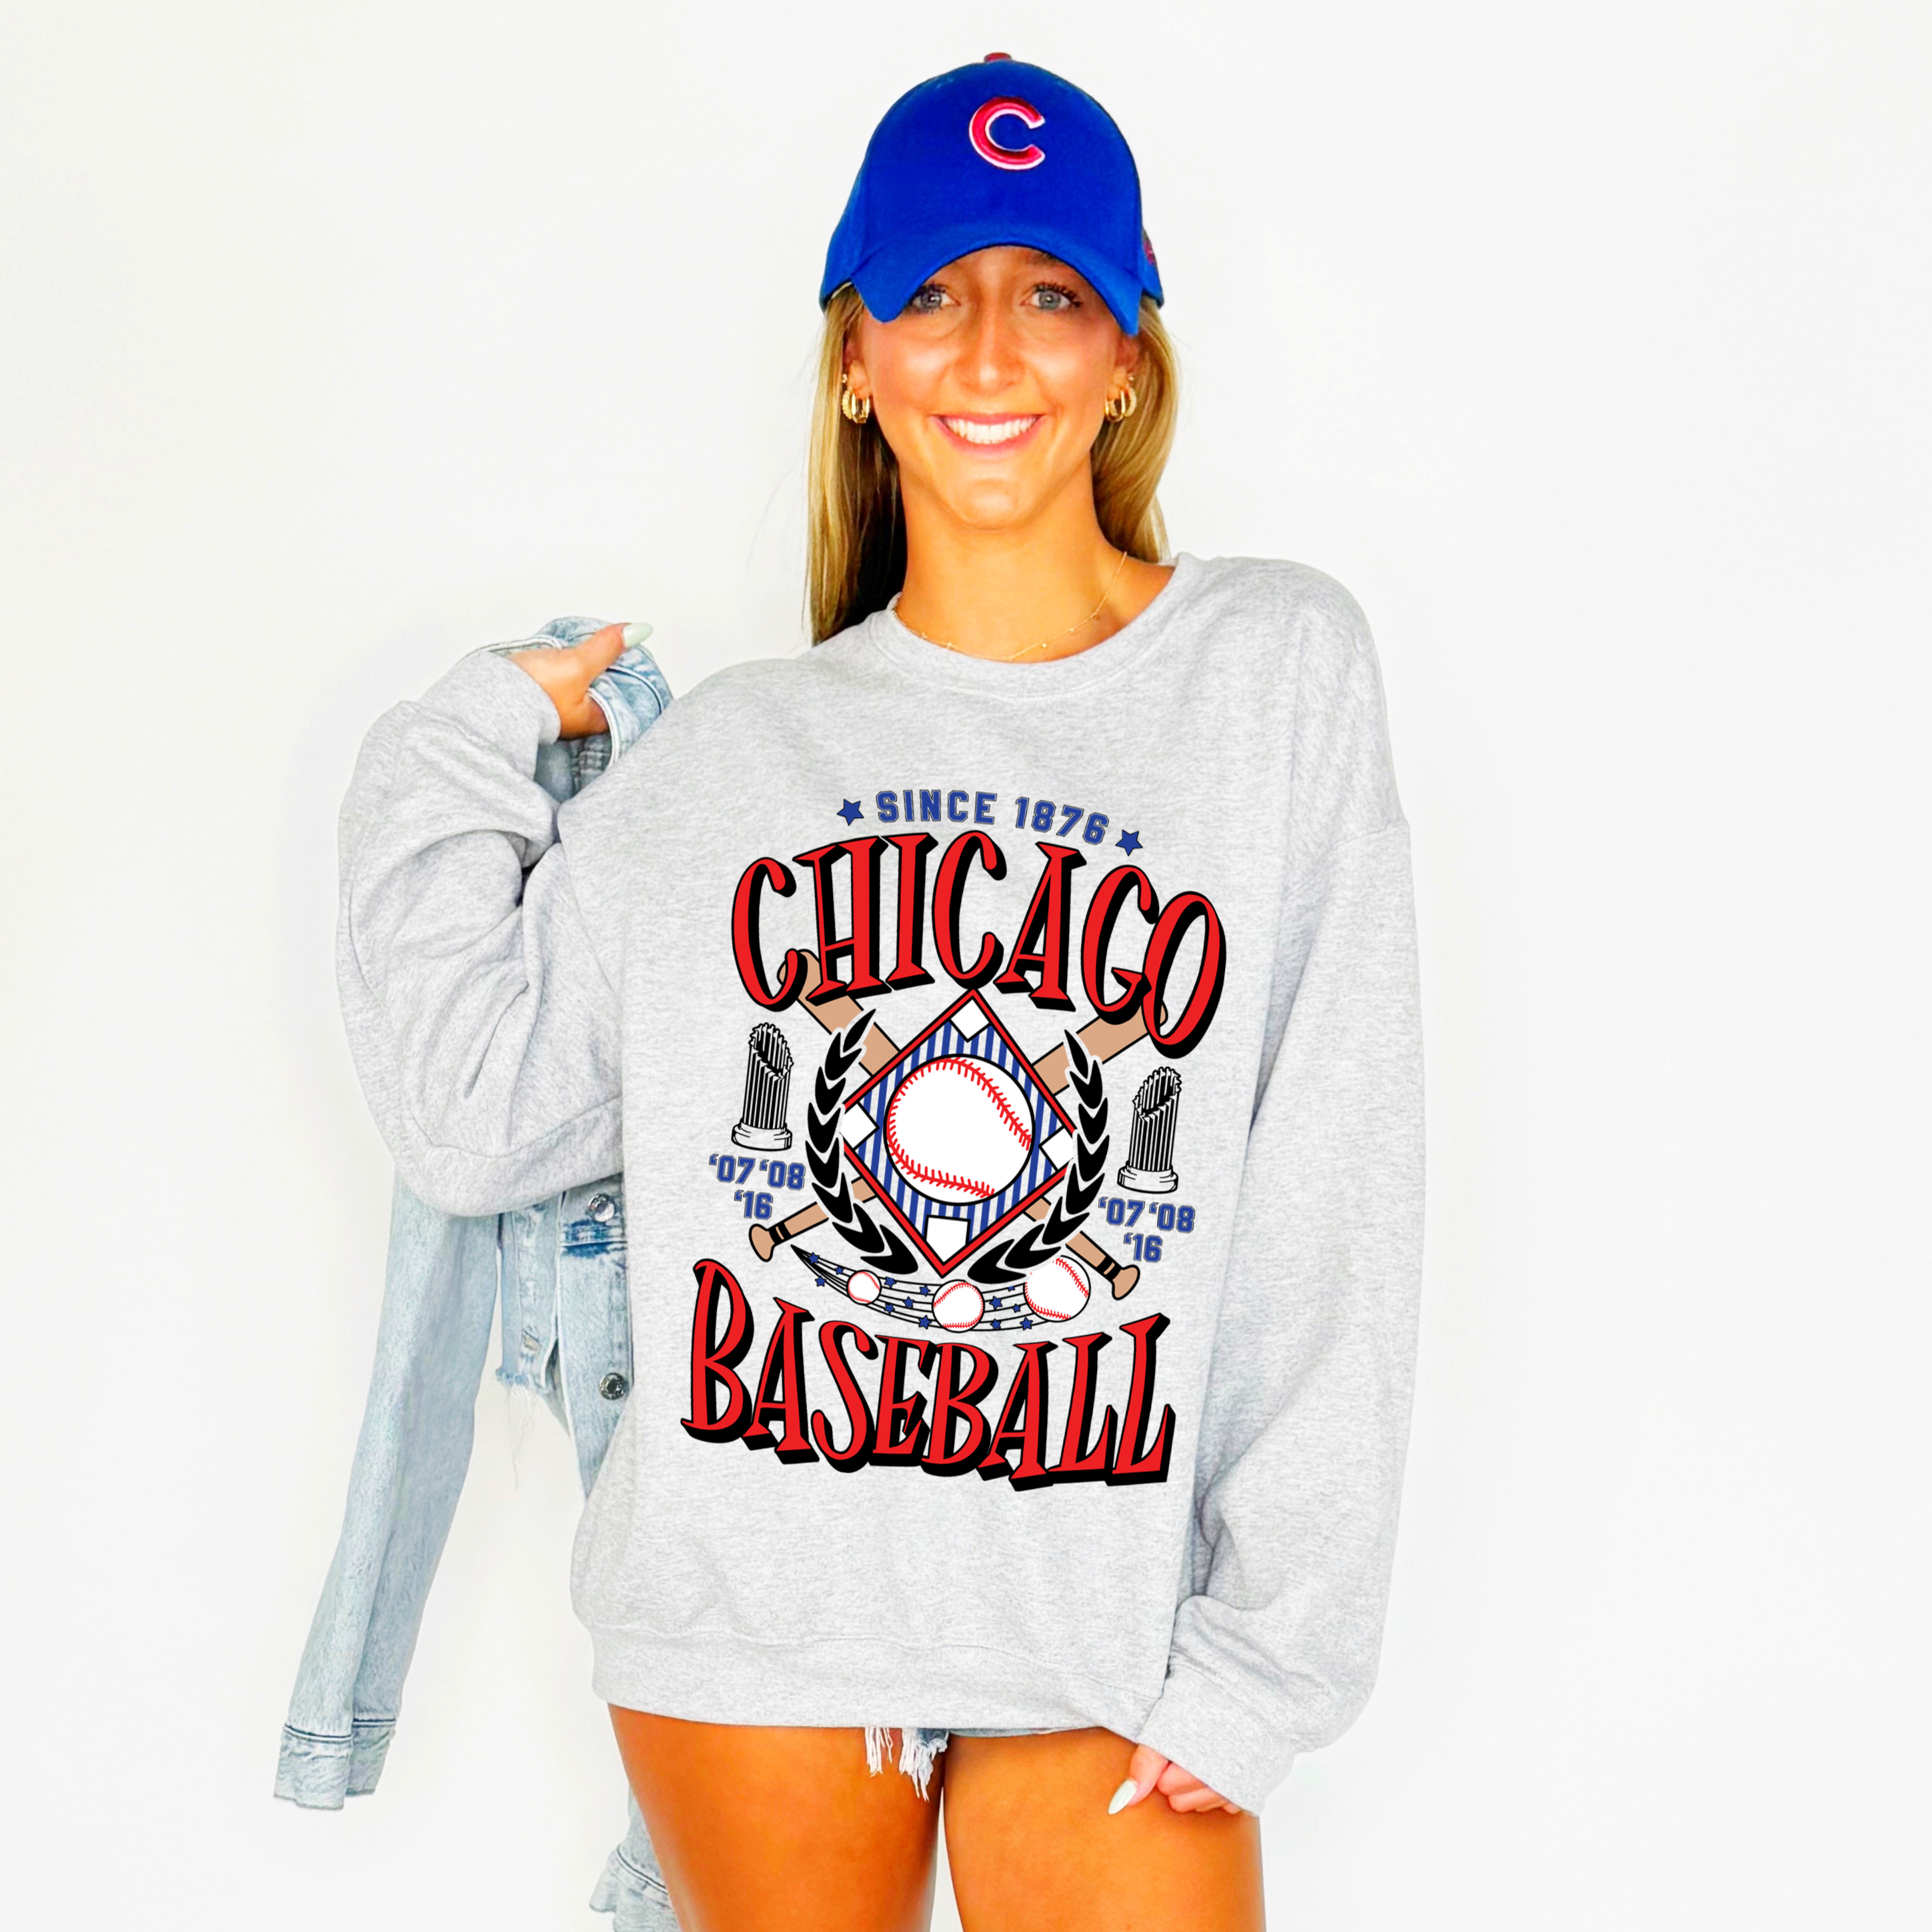 Chicago Cubs Inspired Baseball Team Youth & Adult Sweatshirt